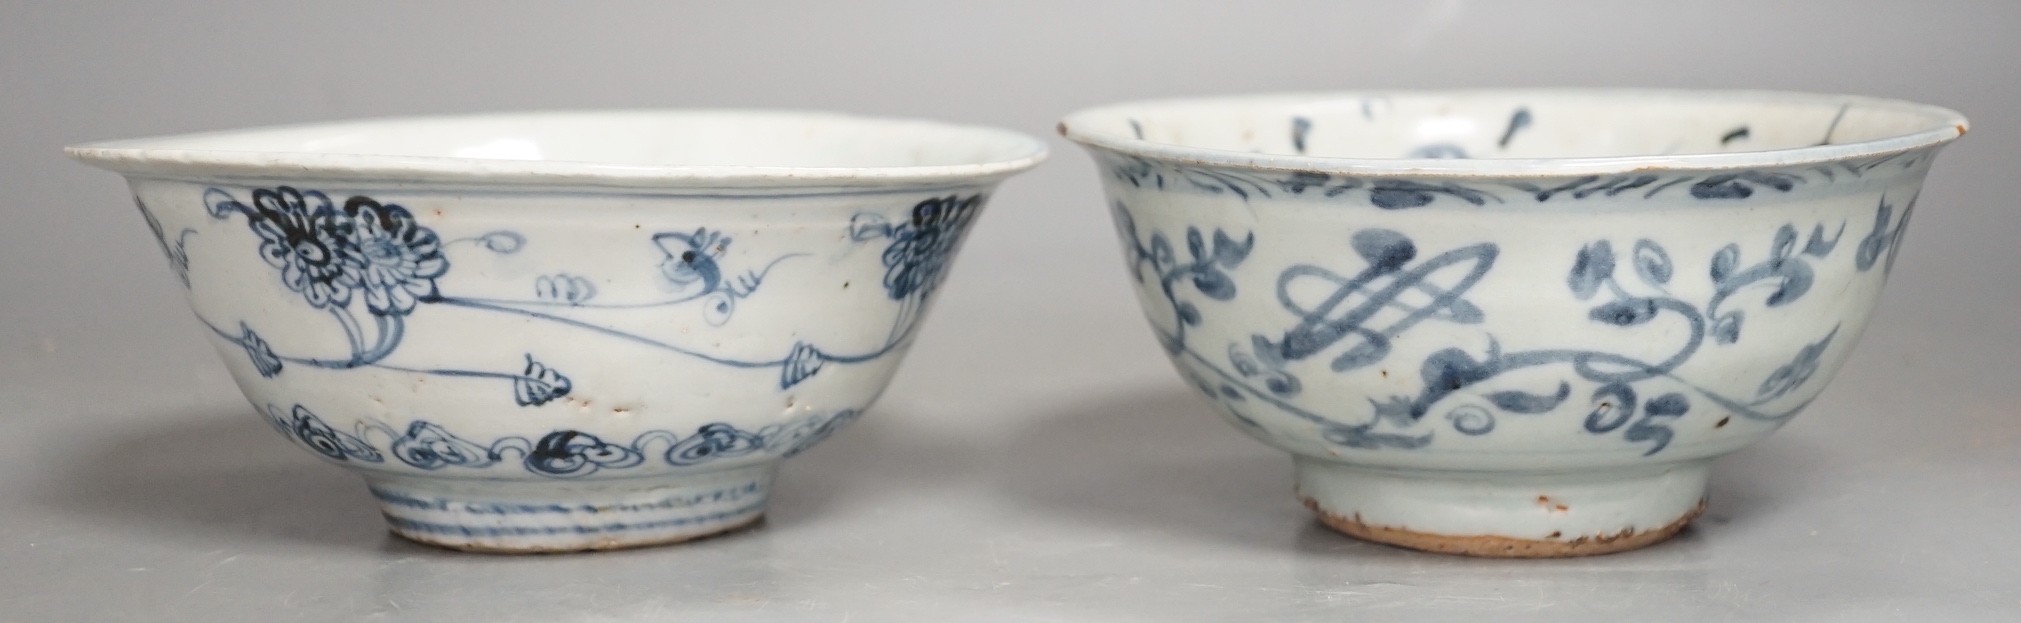 Two Chinese late Ming blue and white bowls, 16th/17th century, painted with flowers and foliage, 14.3 and 15.8cm